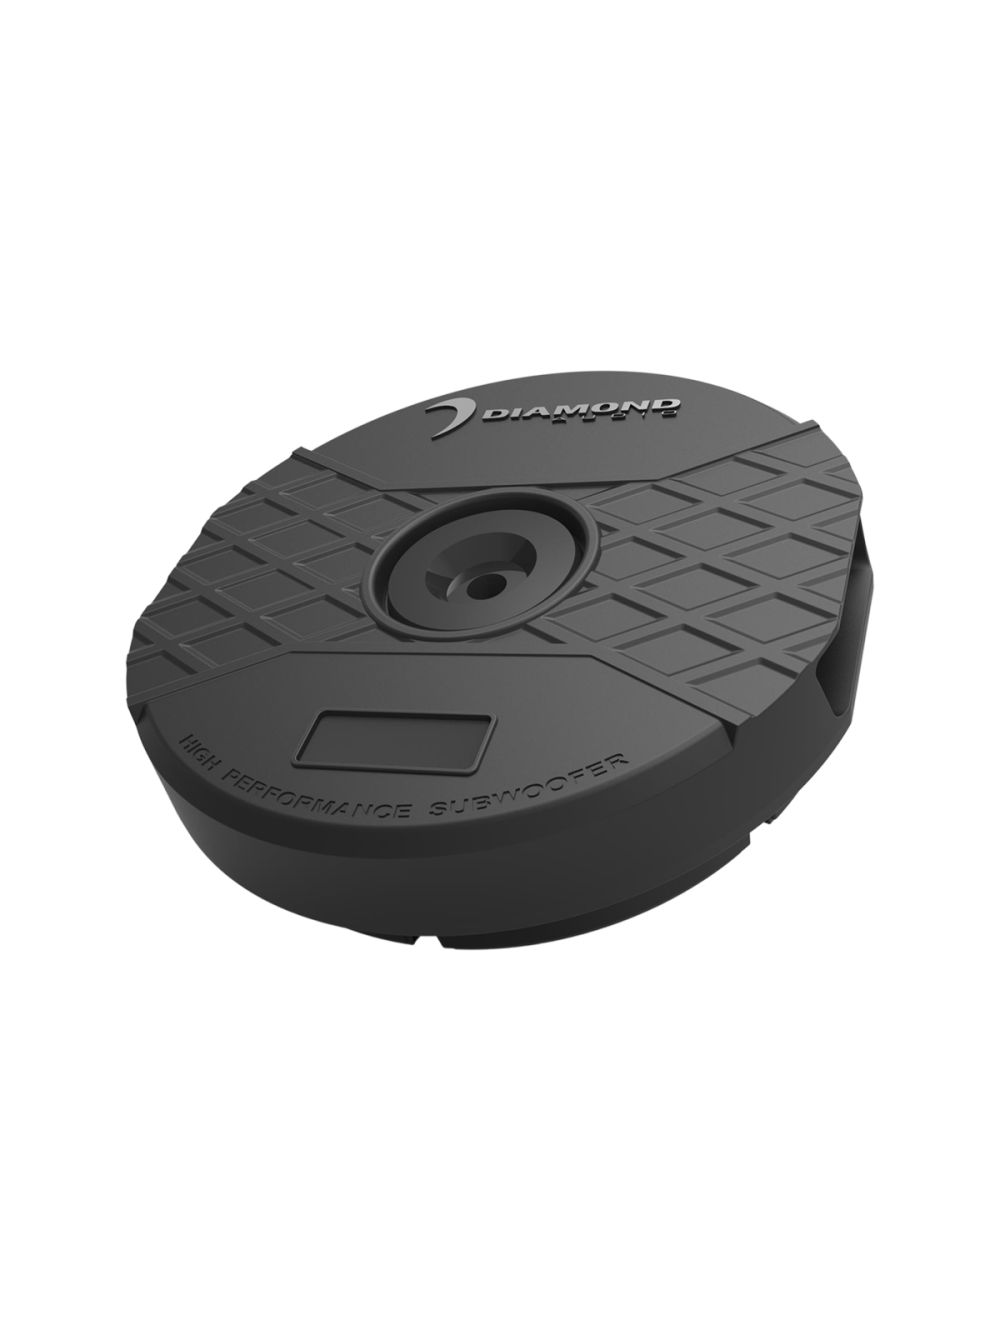 Diamond Audio DMD 11-inch 300W RMS Power Handling Non-Amplified Shallow Spare Tire Passive Subwoofer DPSTX12